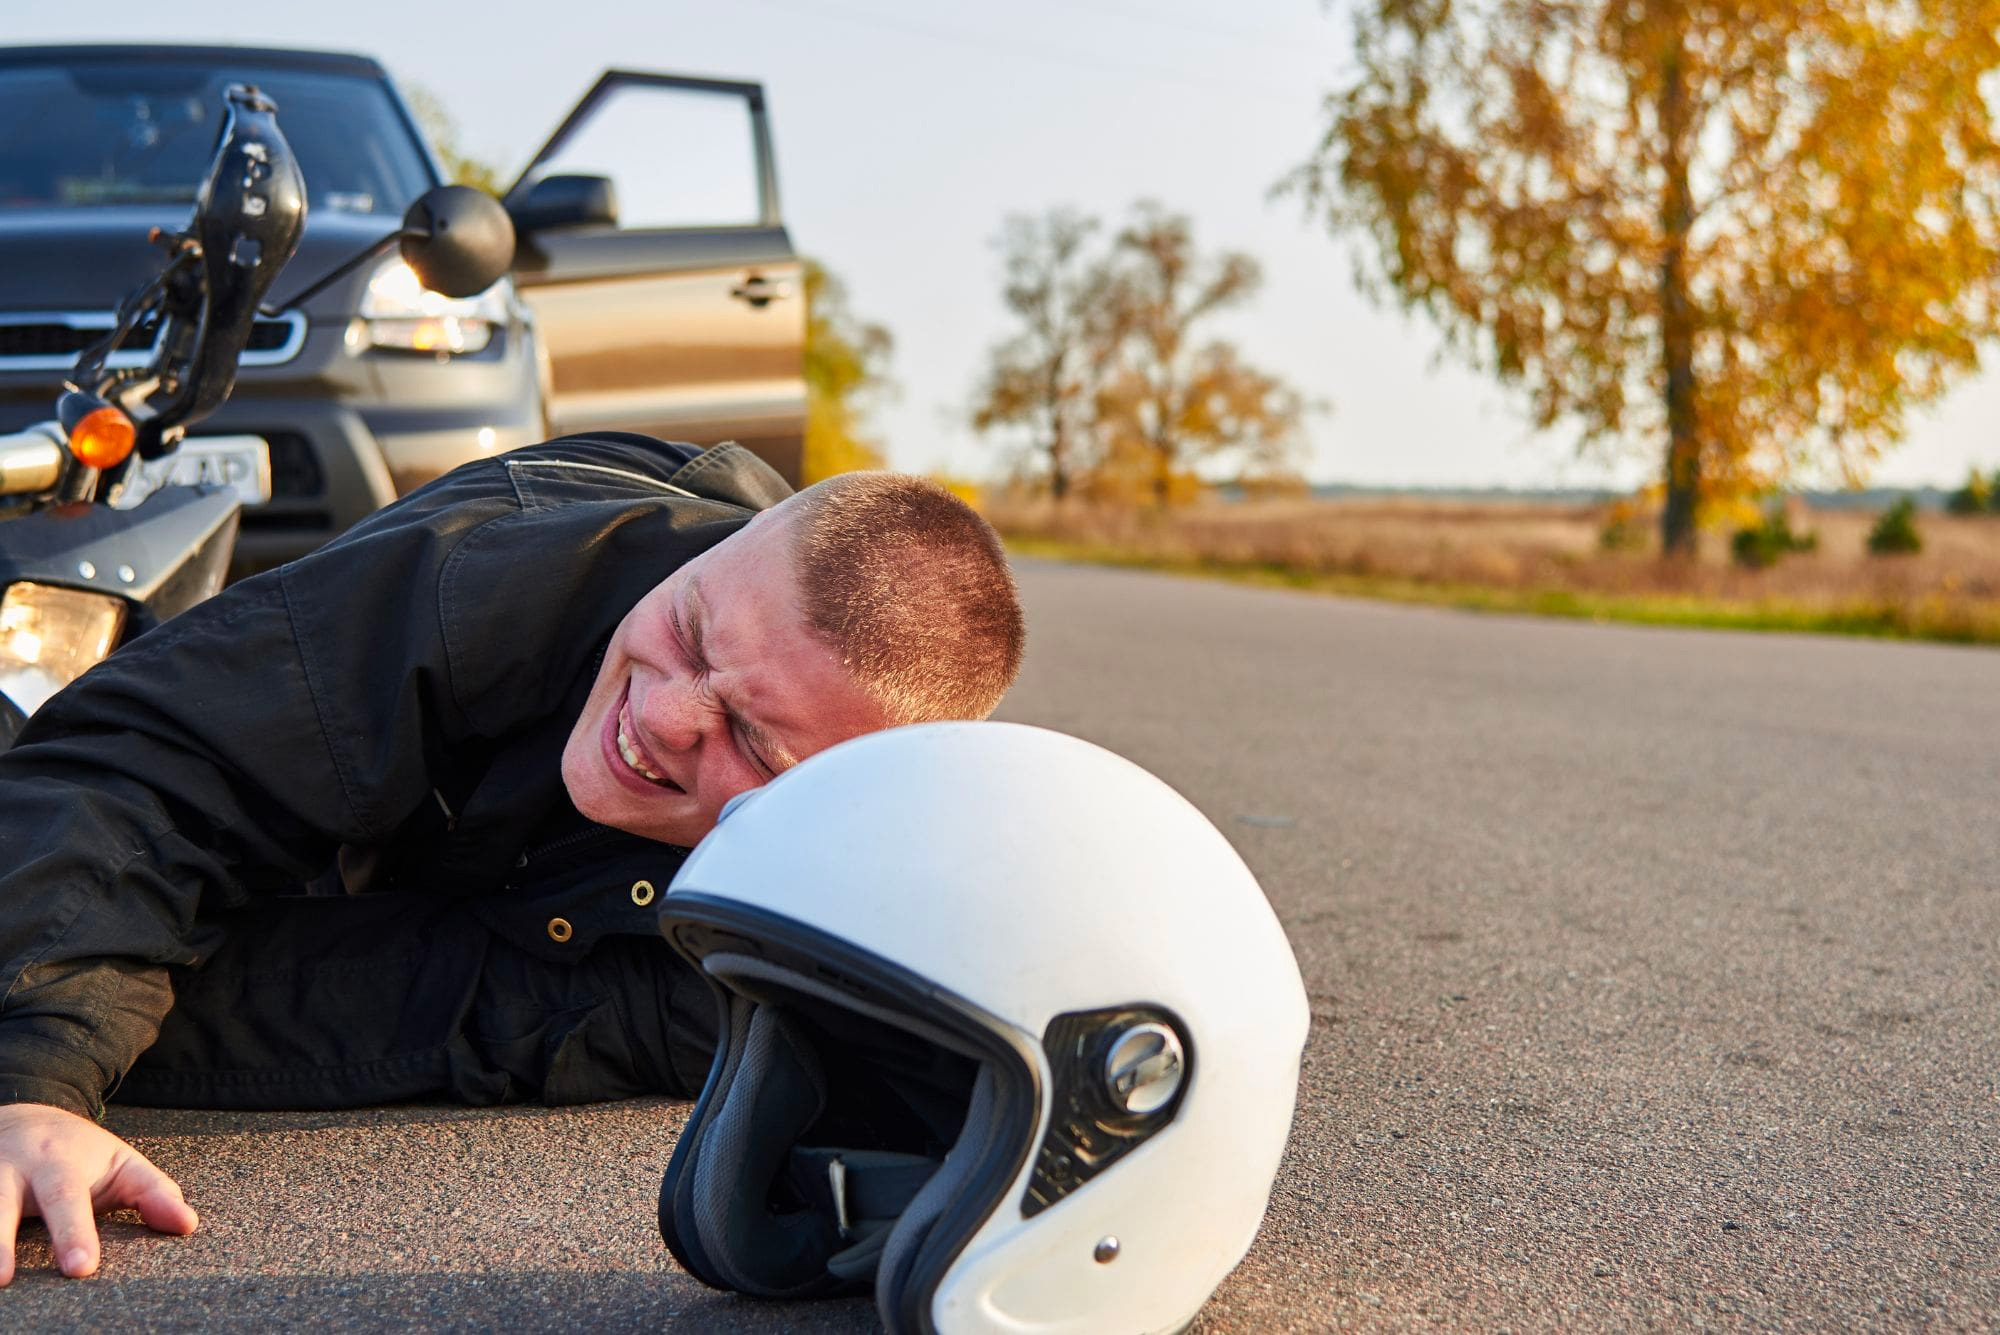 man lies on the road after a motorcycle accident with a car